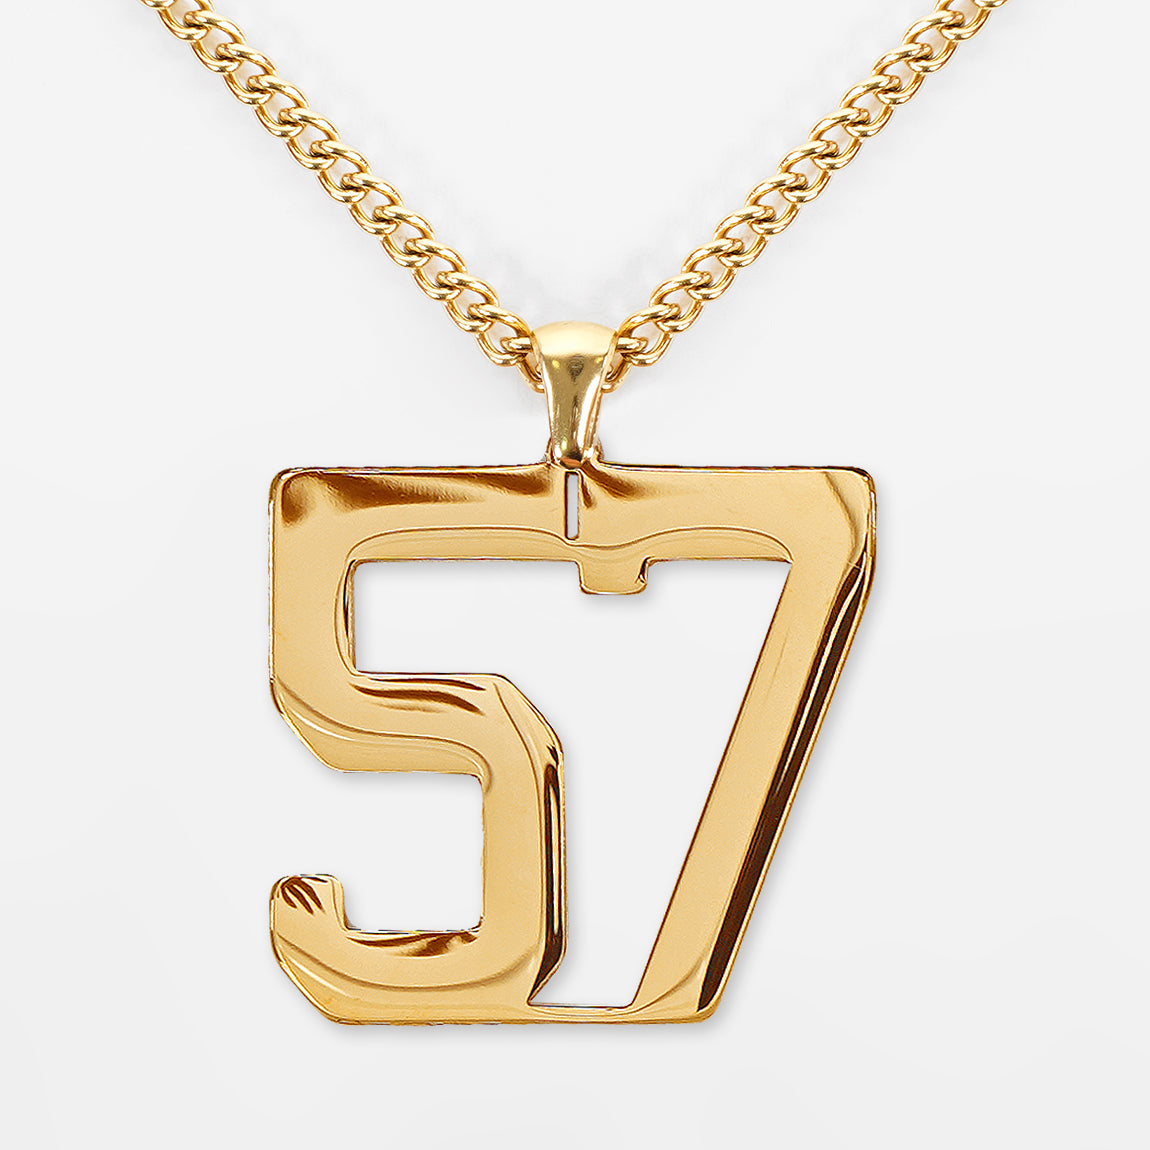 57 Number Pendant with Chain Necklace - Gold Plated Stainless Steel